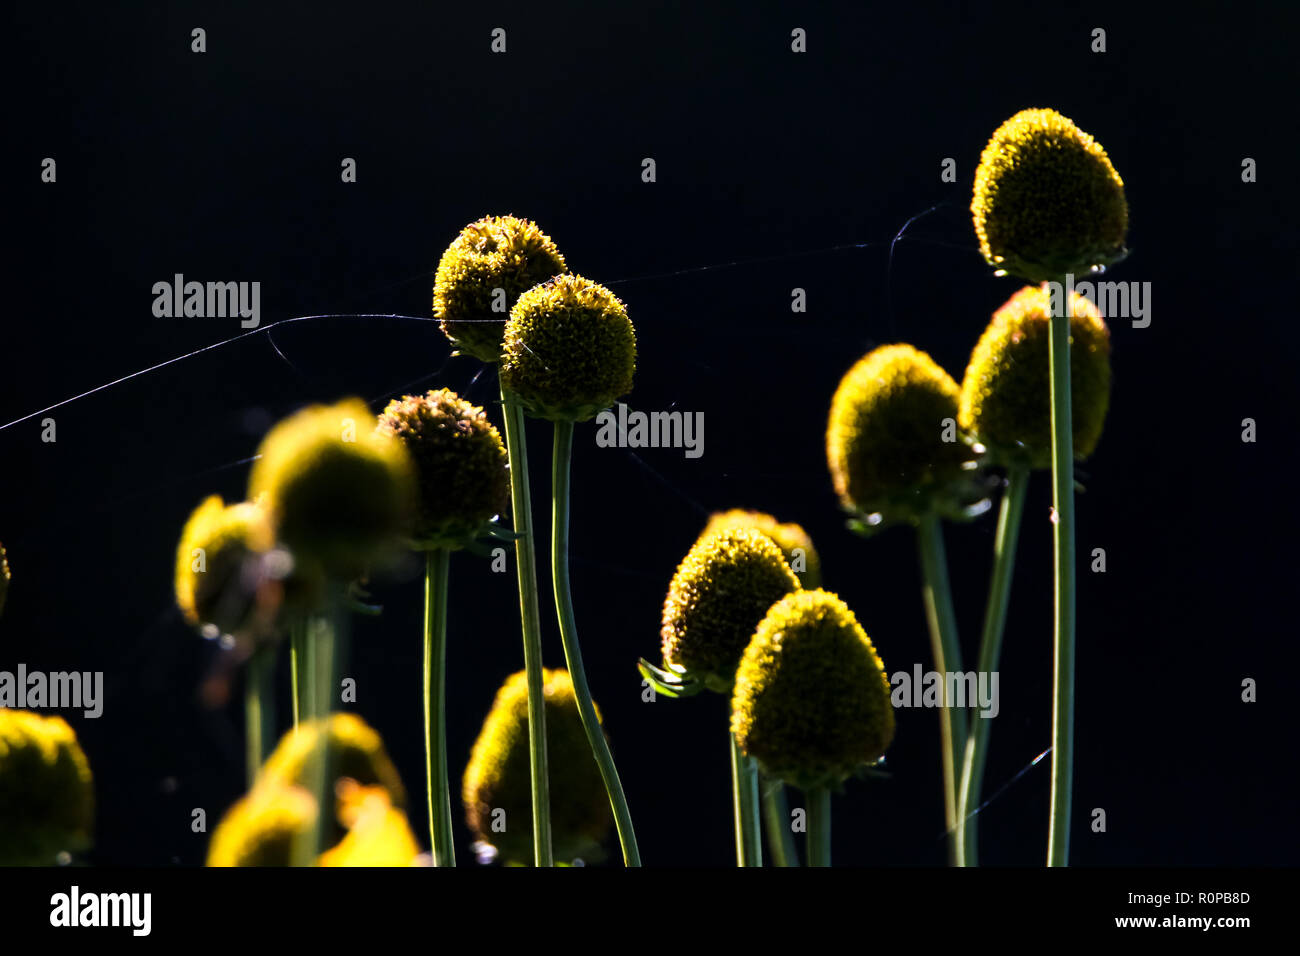 Yellow flowers. Flowers on dark background.  Meadow with flowers. Wild flowers with spider web. Nature rural flowers on field. Stock Photo